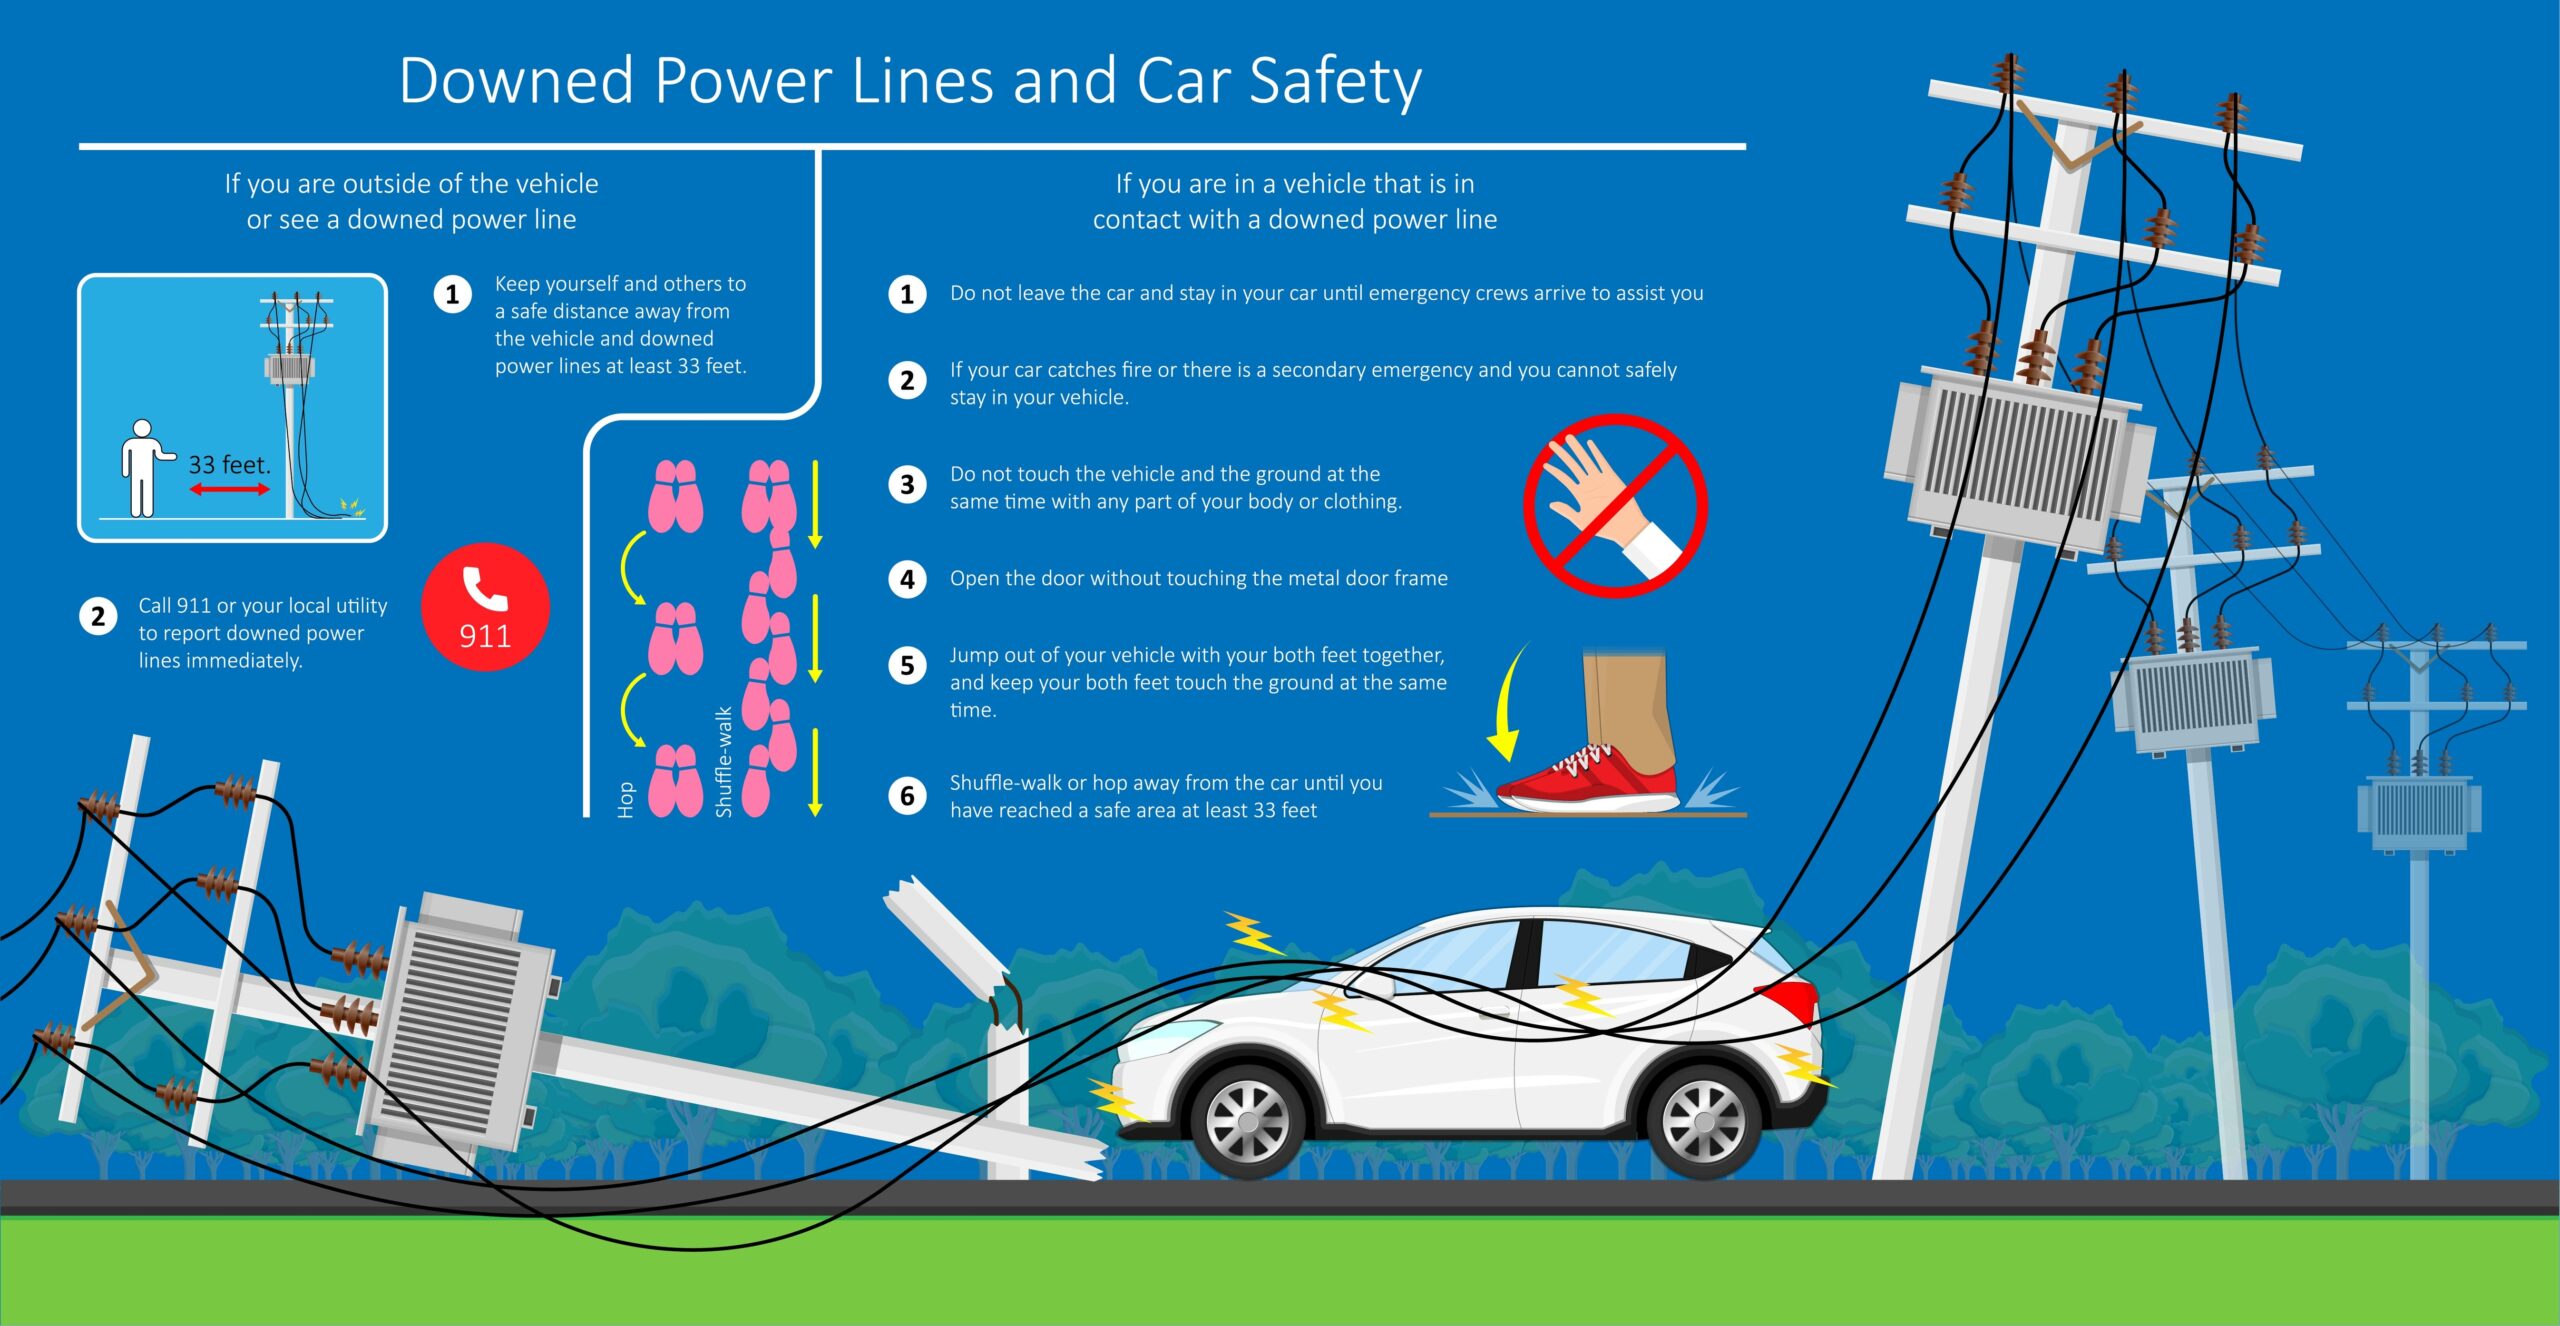 What to do if a vehicle strikes a power pole